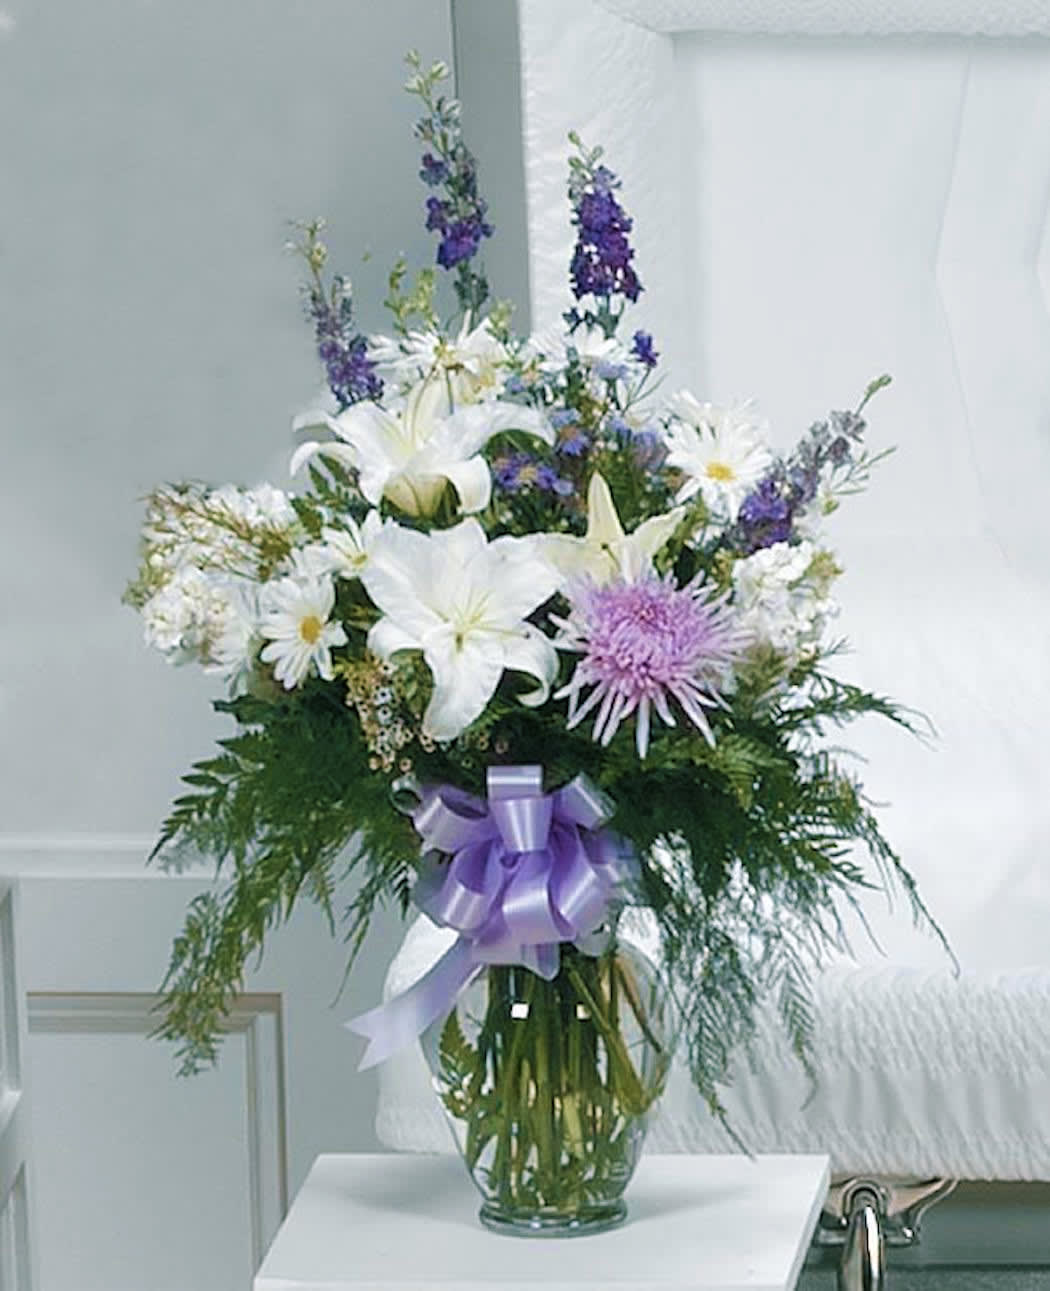 Pure Granduer - A stunning display of whites and lavender mums, lilies, stock and larkspur complimenting with beautiful greenery.